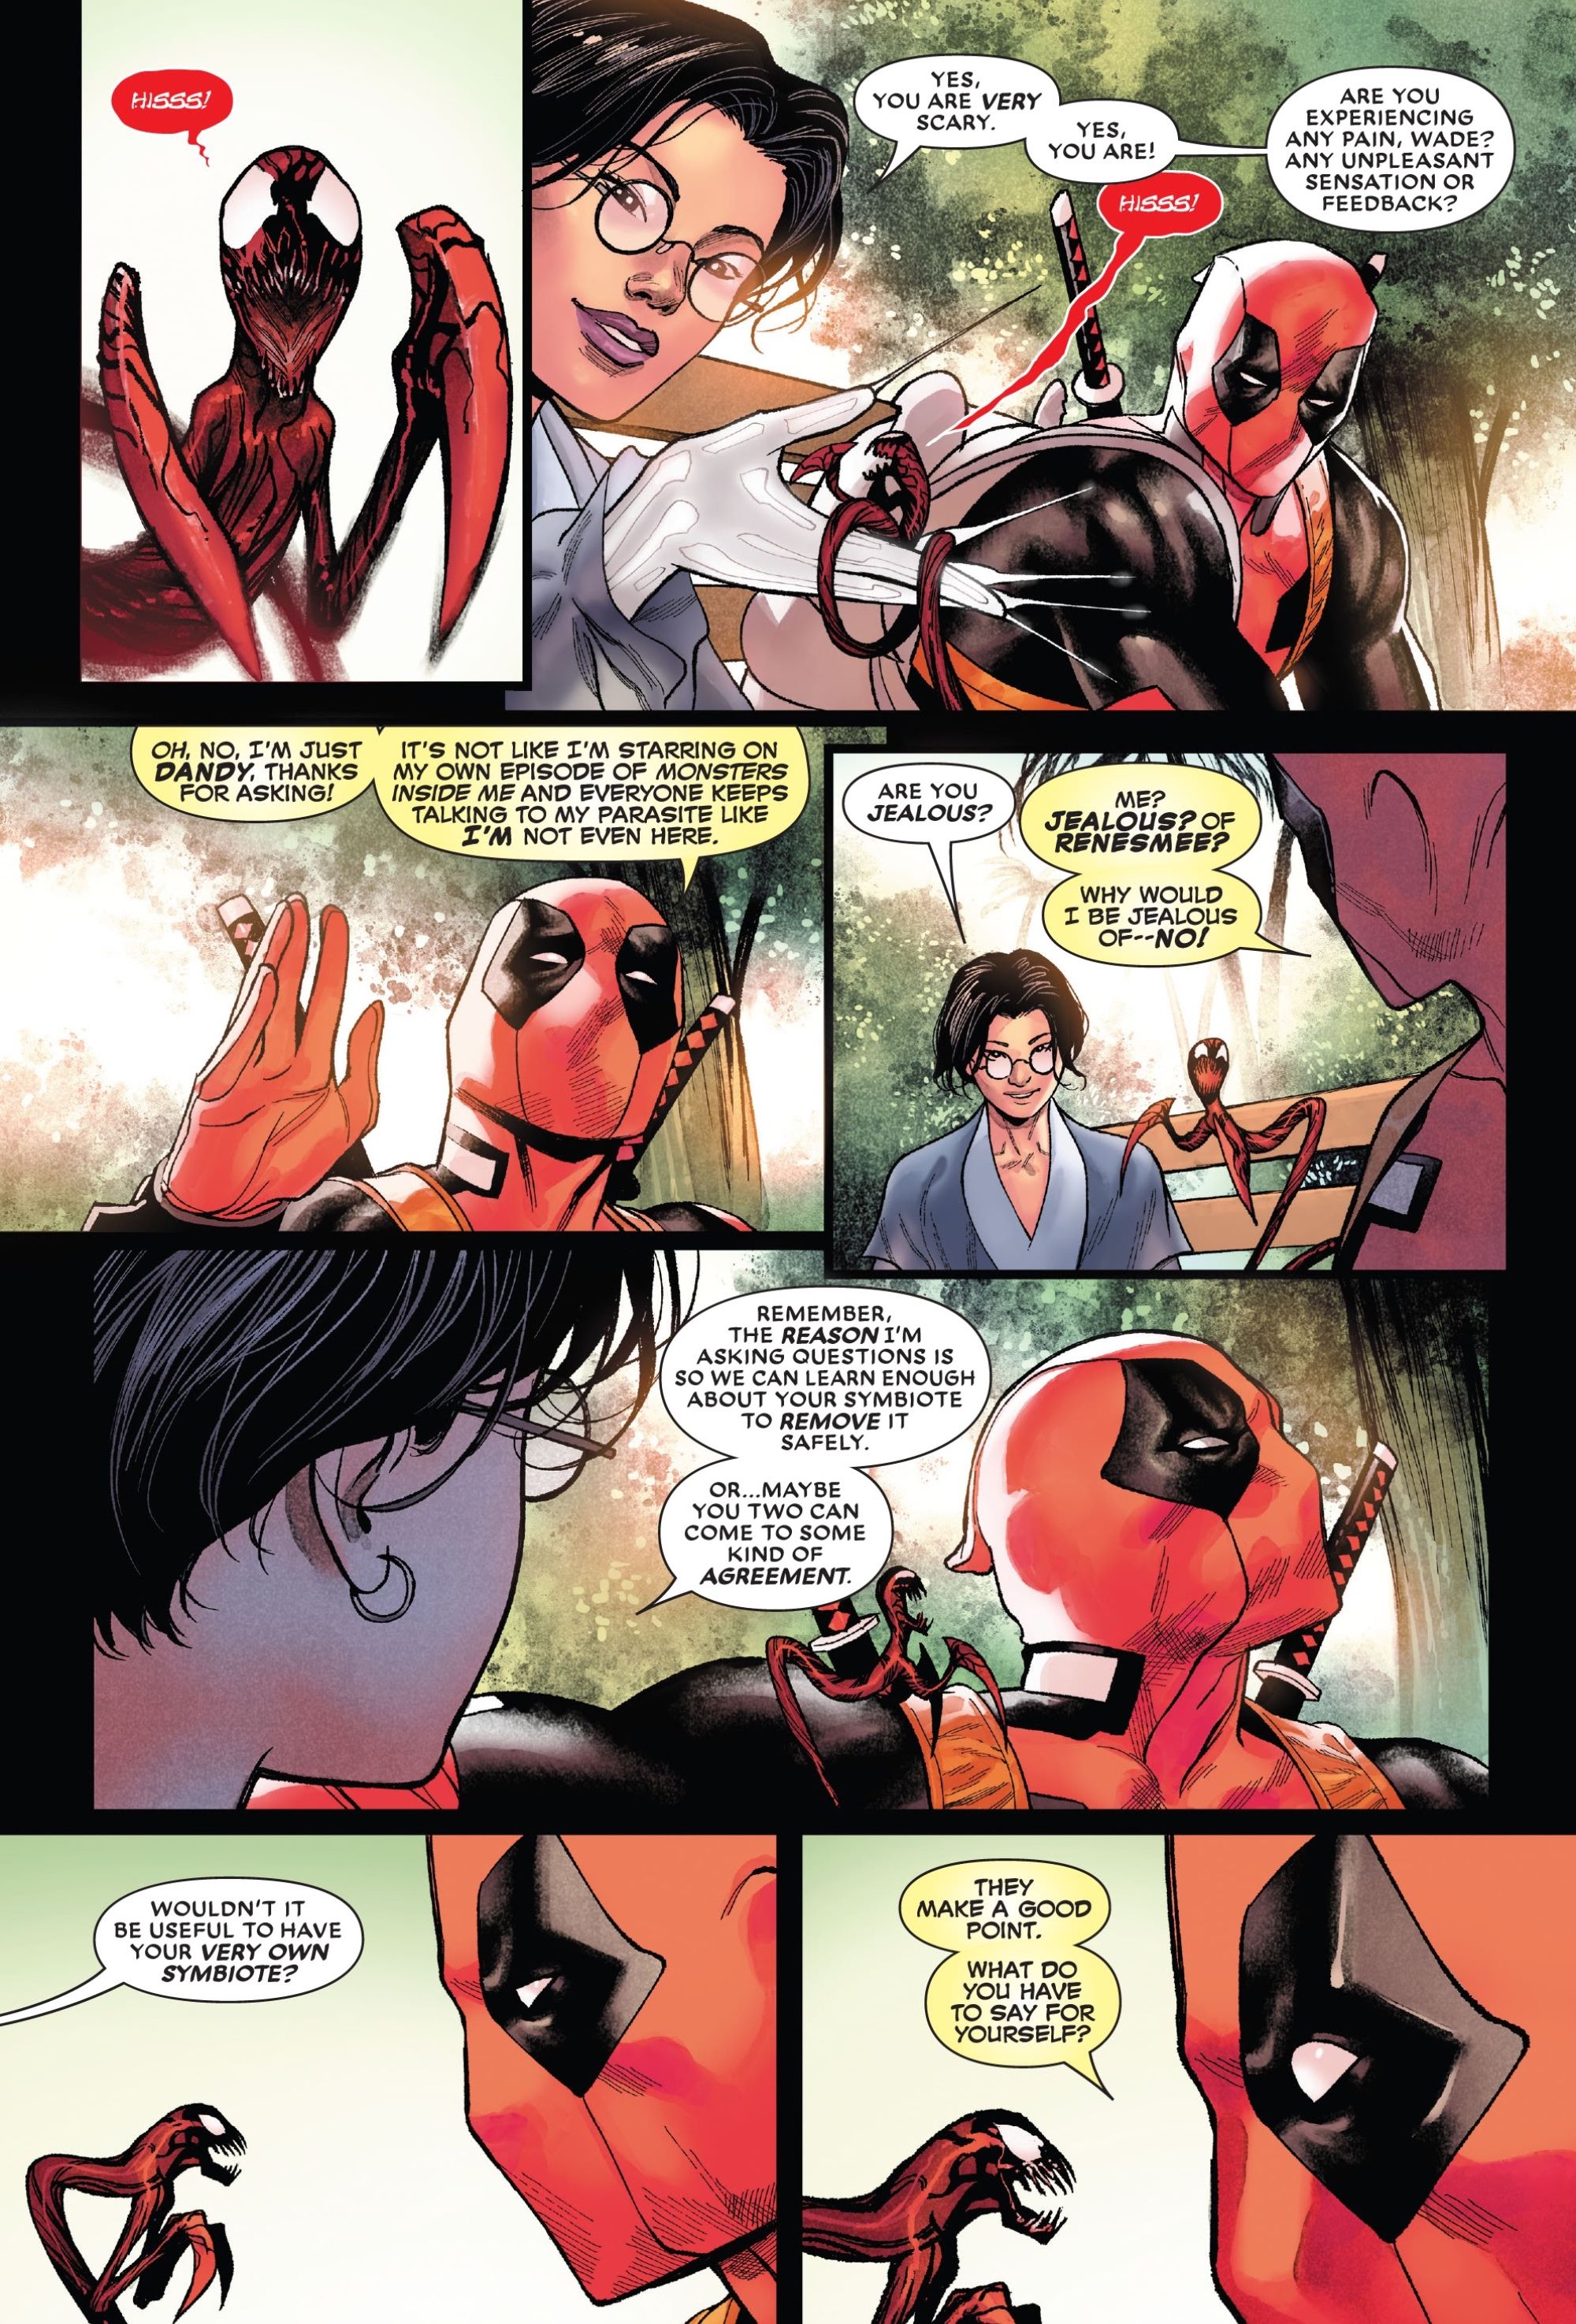 Deadpool has his own Carnage Symbiote Son